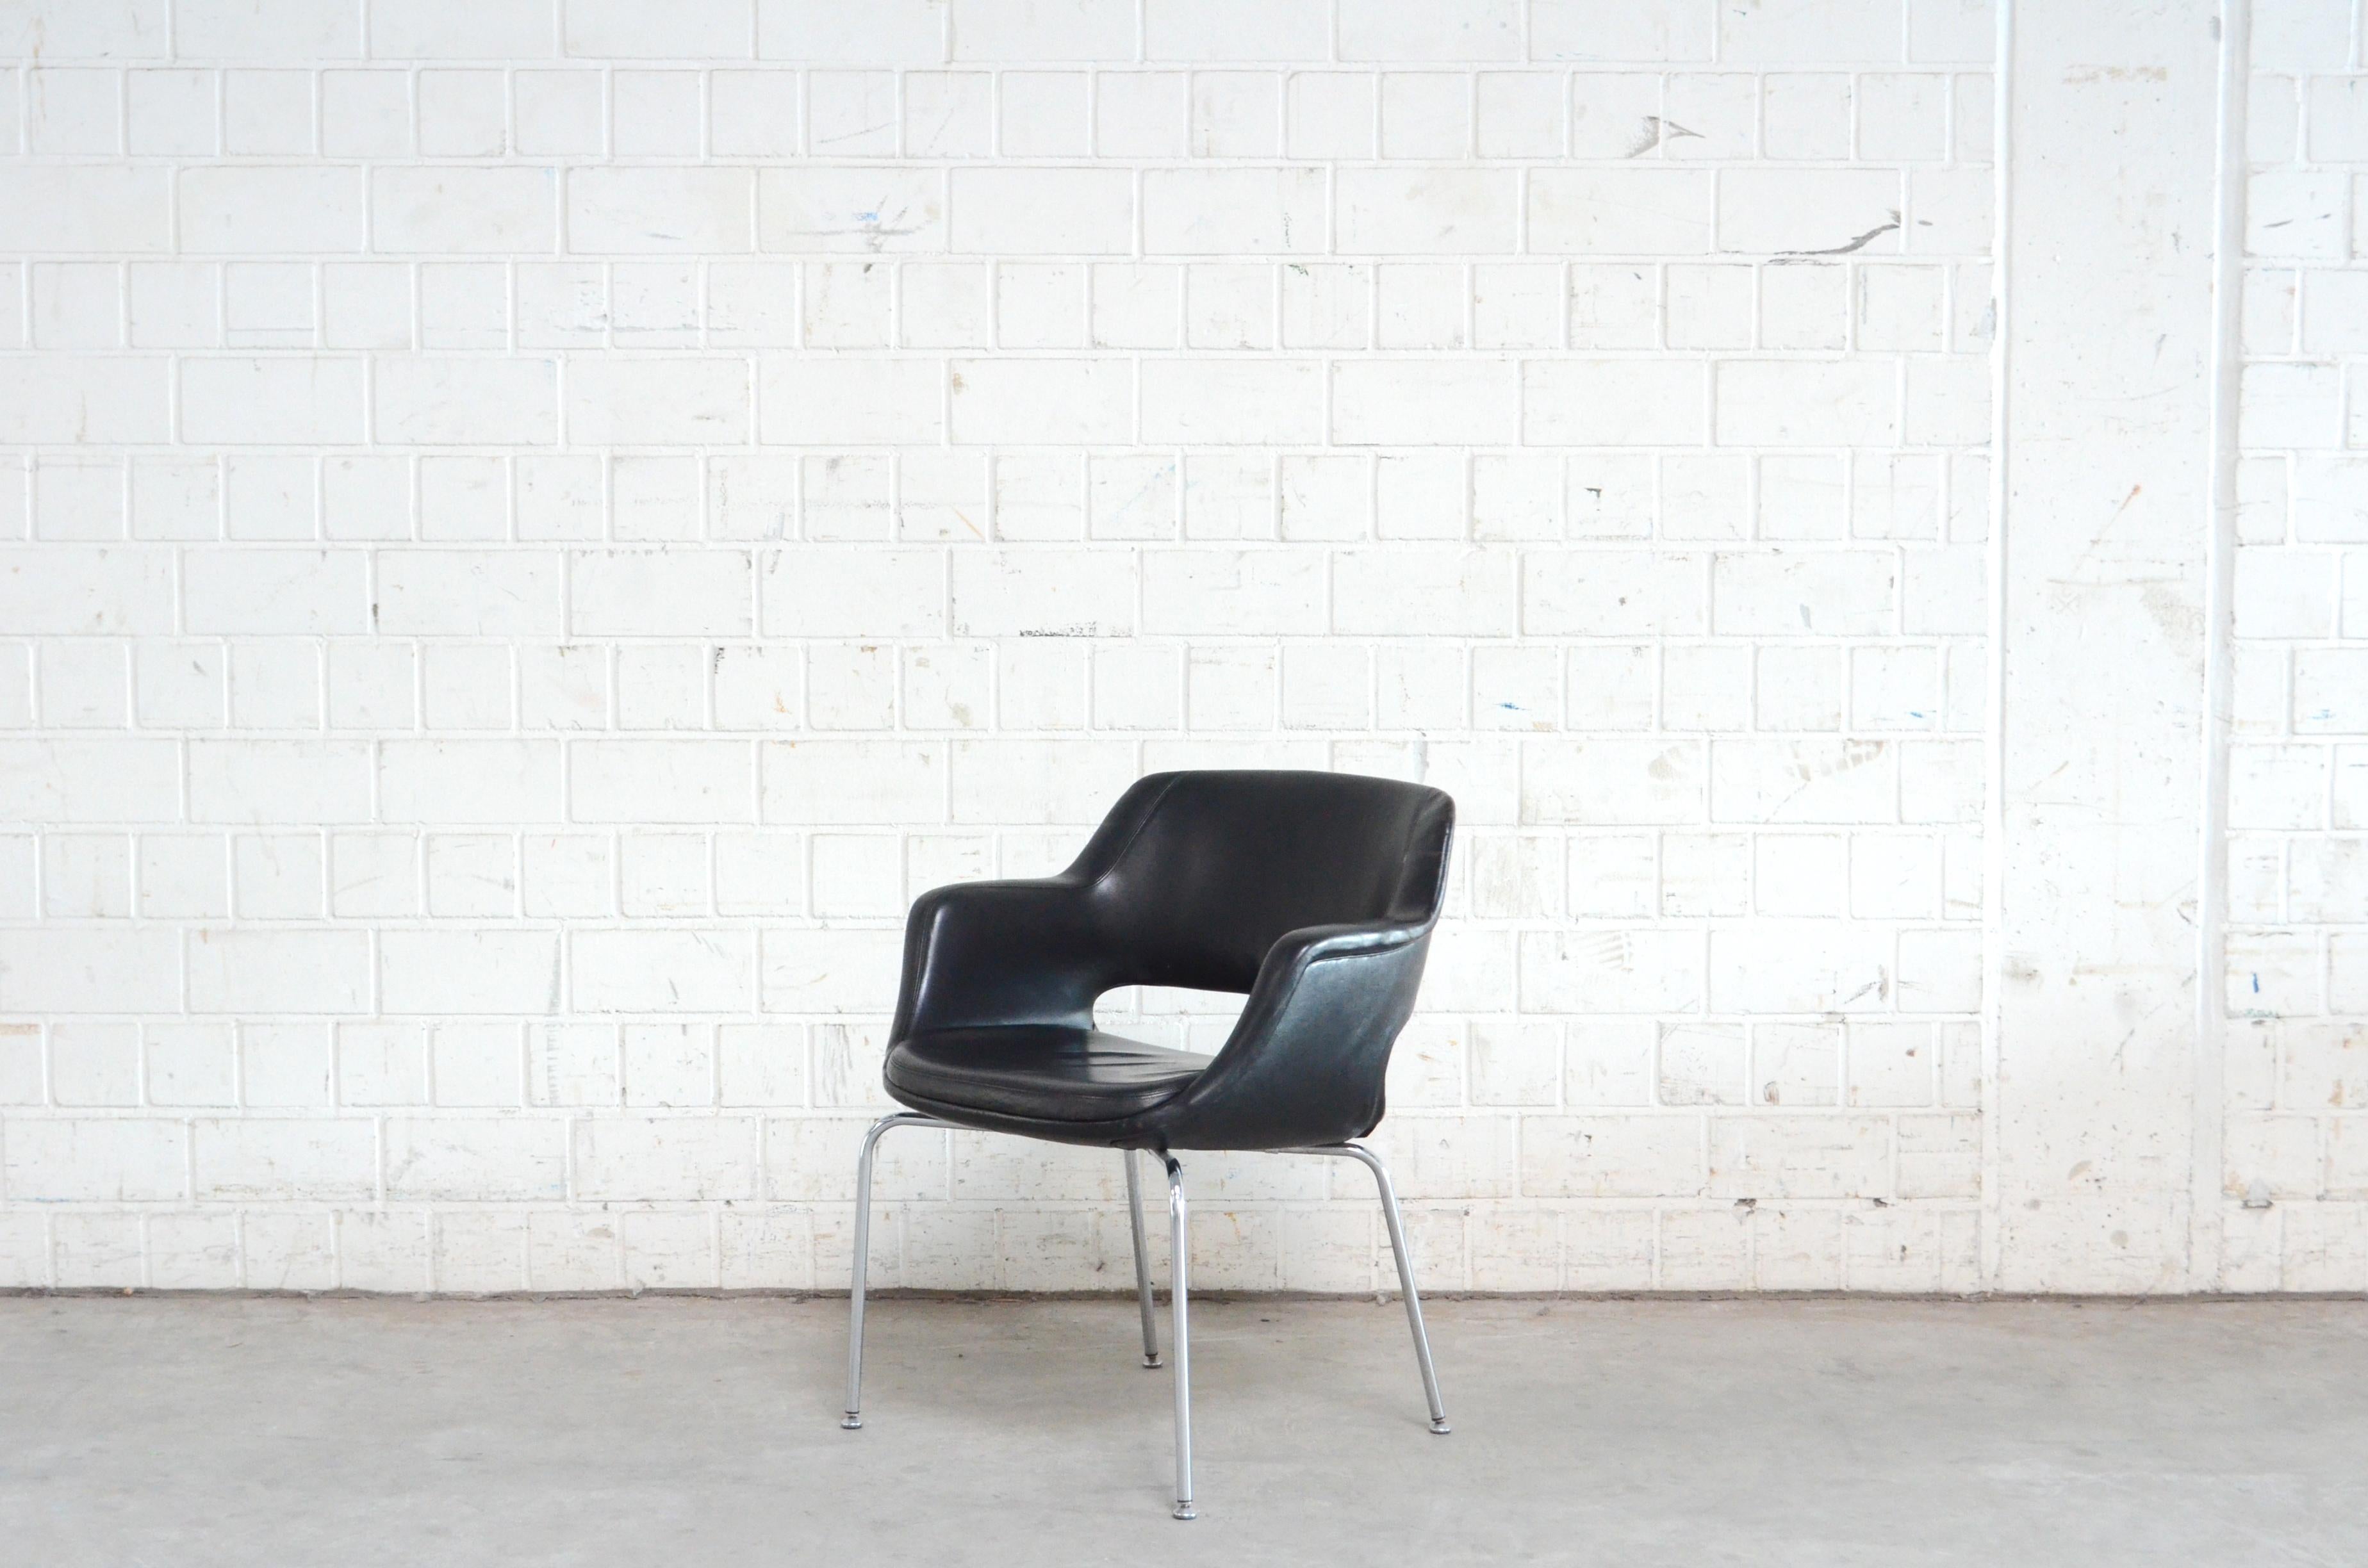 Olli Mannermaa 3 Leather Kilta Chair by Eugen Schmidt & Cassina Martela In Good Condition For Sale In Munich, Bavaria